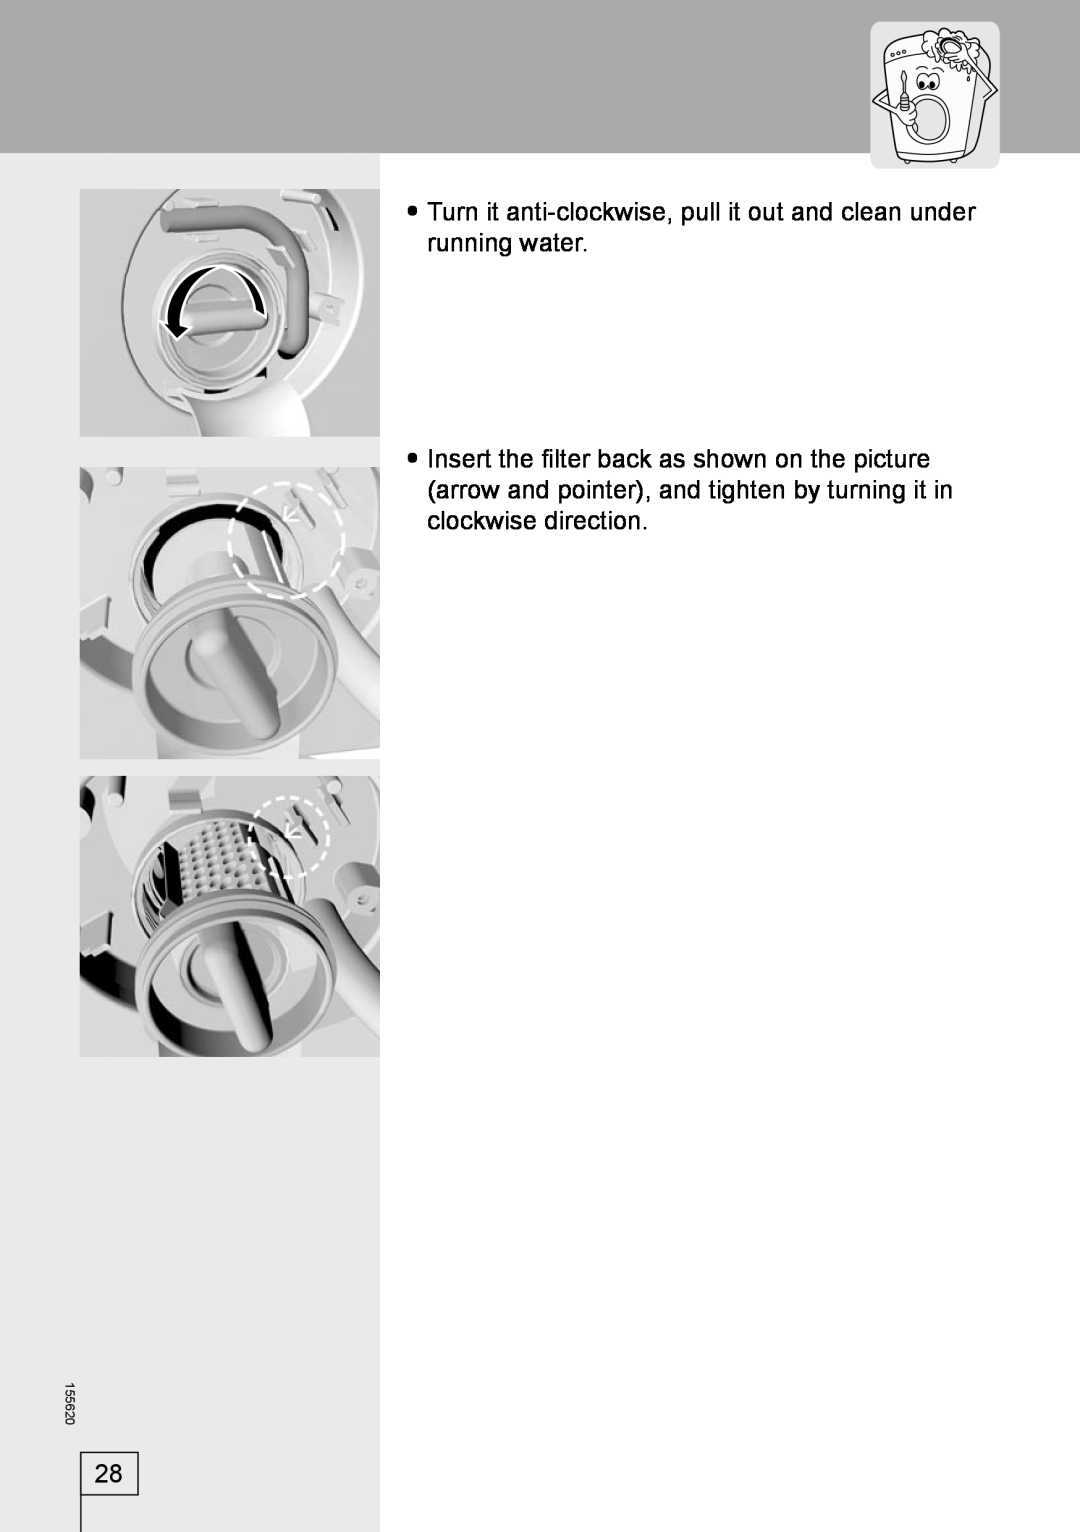 Smeg 155620 manual Turn it anti-clockwise, pull it out and clean under running water 